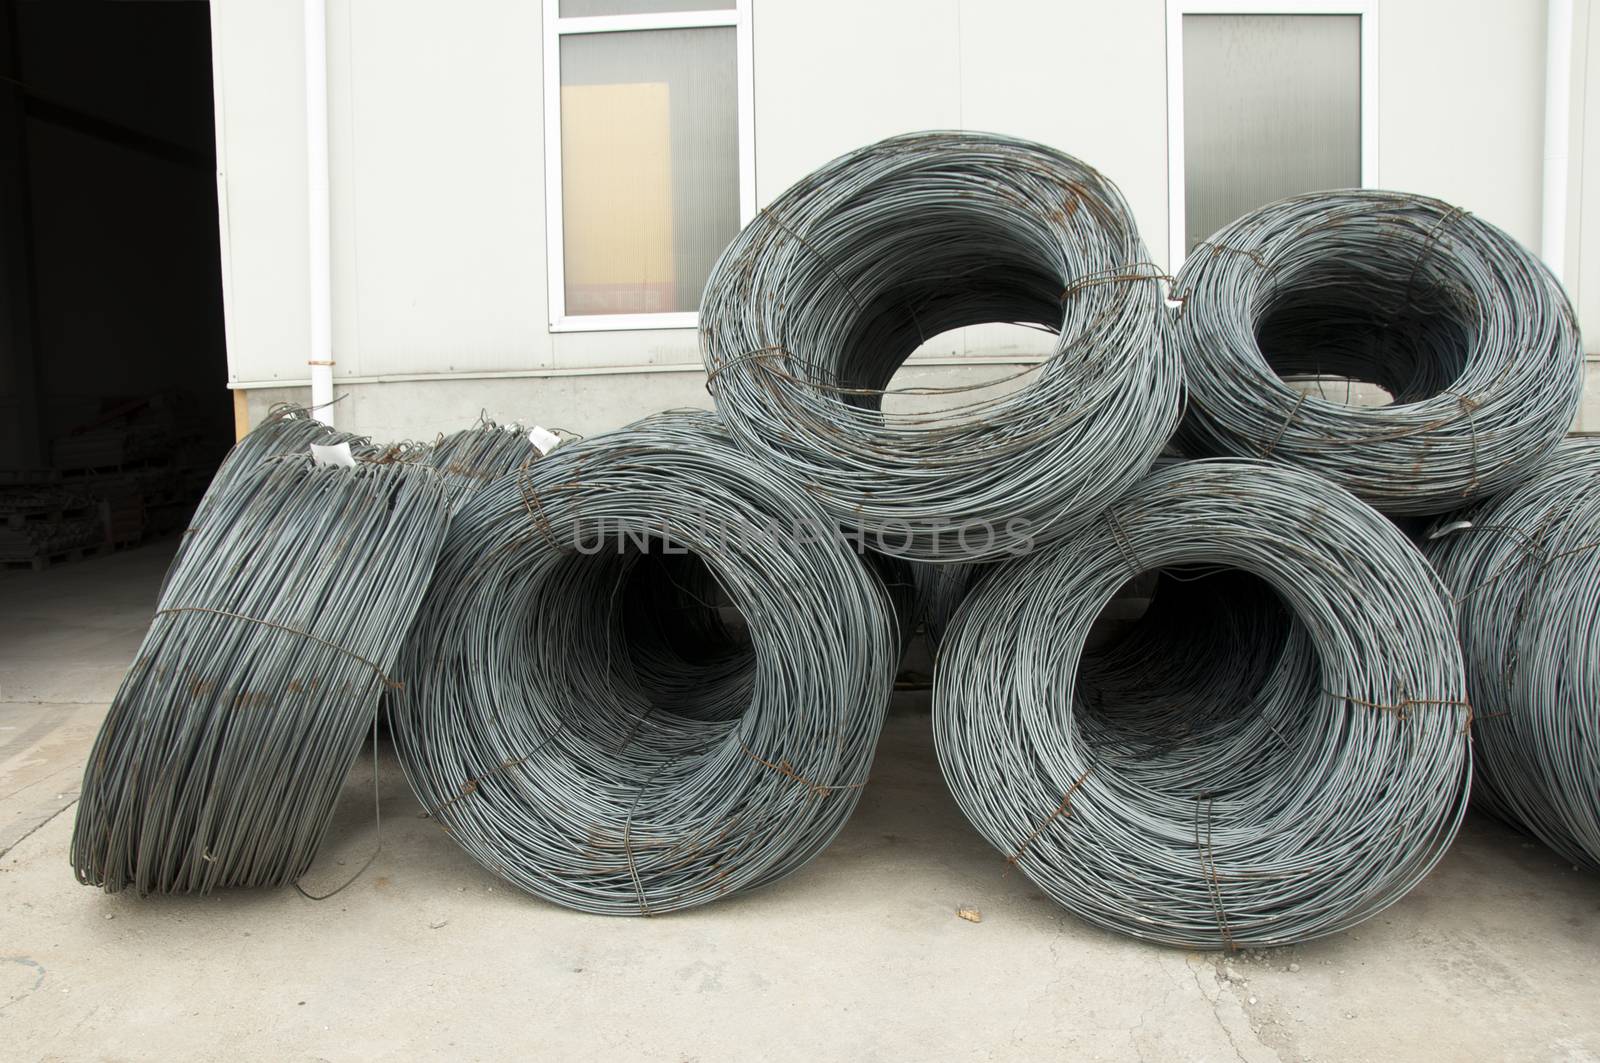 Reinforcing steel bars on roll. Construction materials